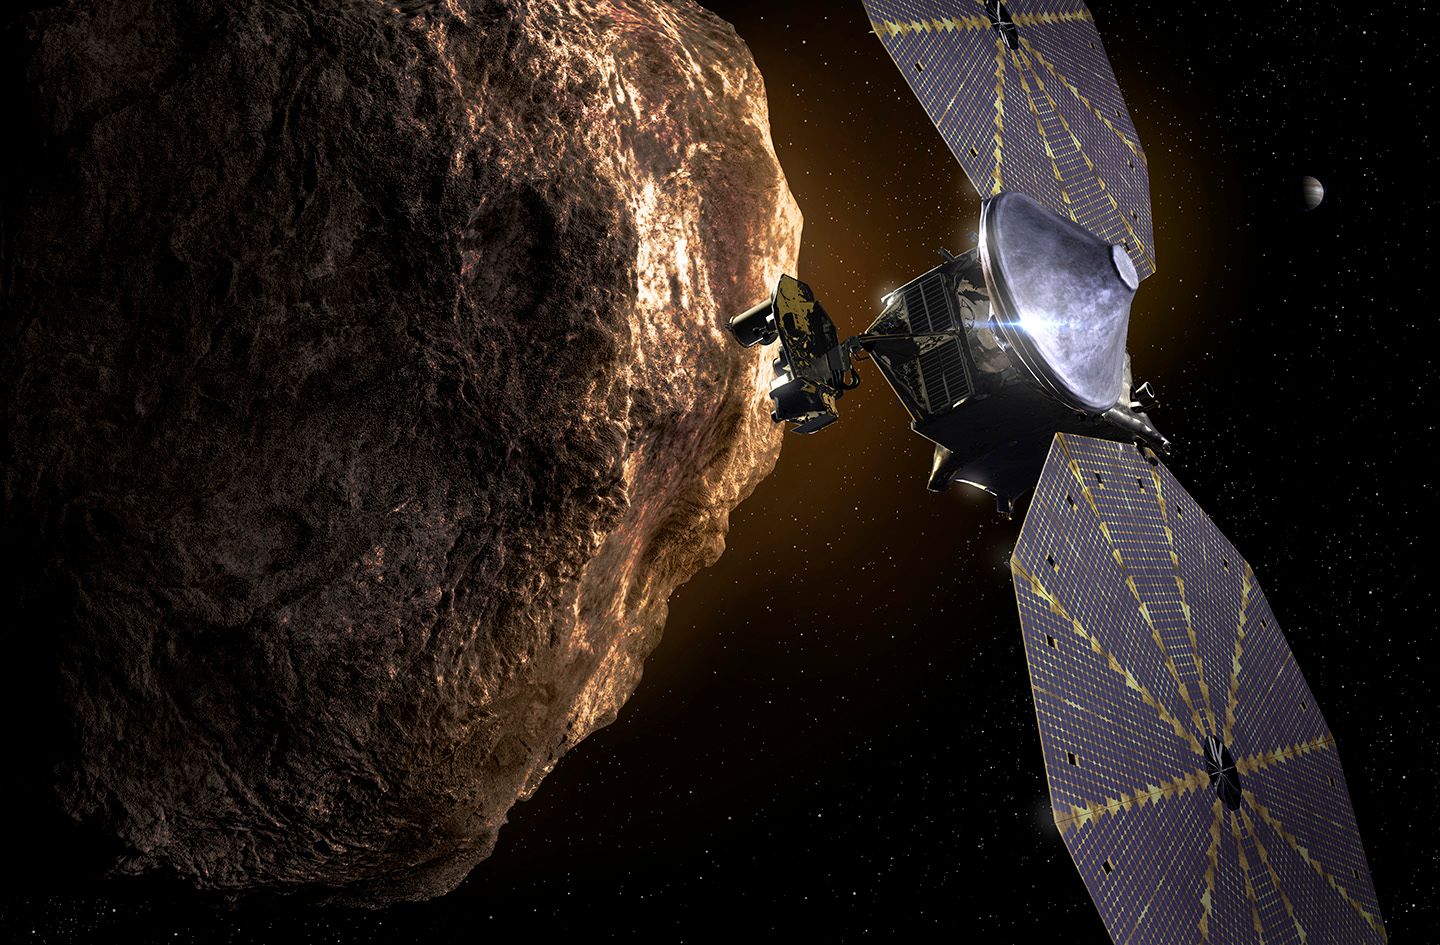 Illustration of a spacecraft at an asteroid.